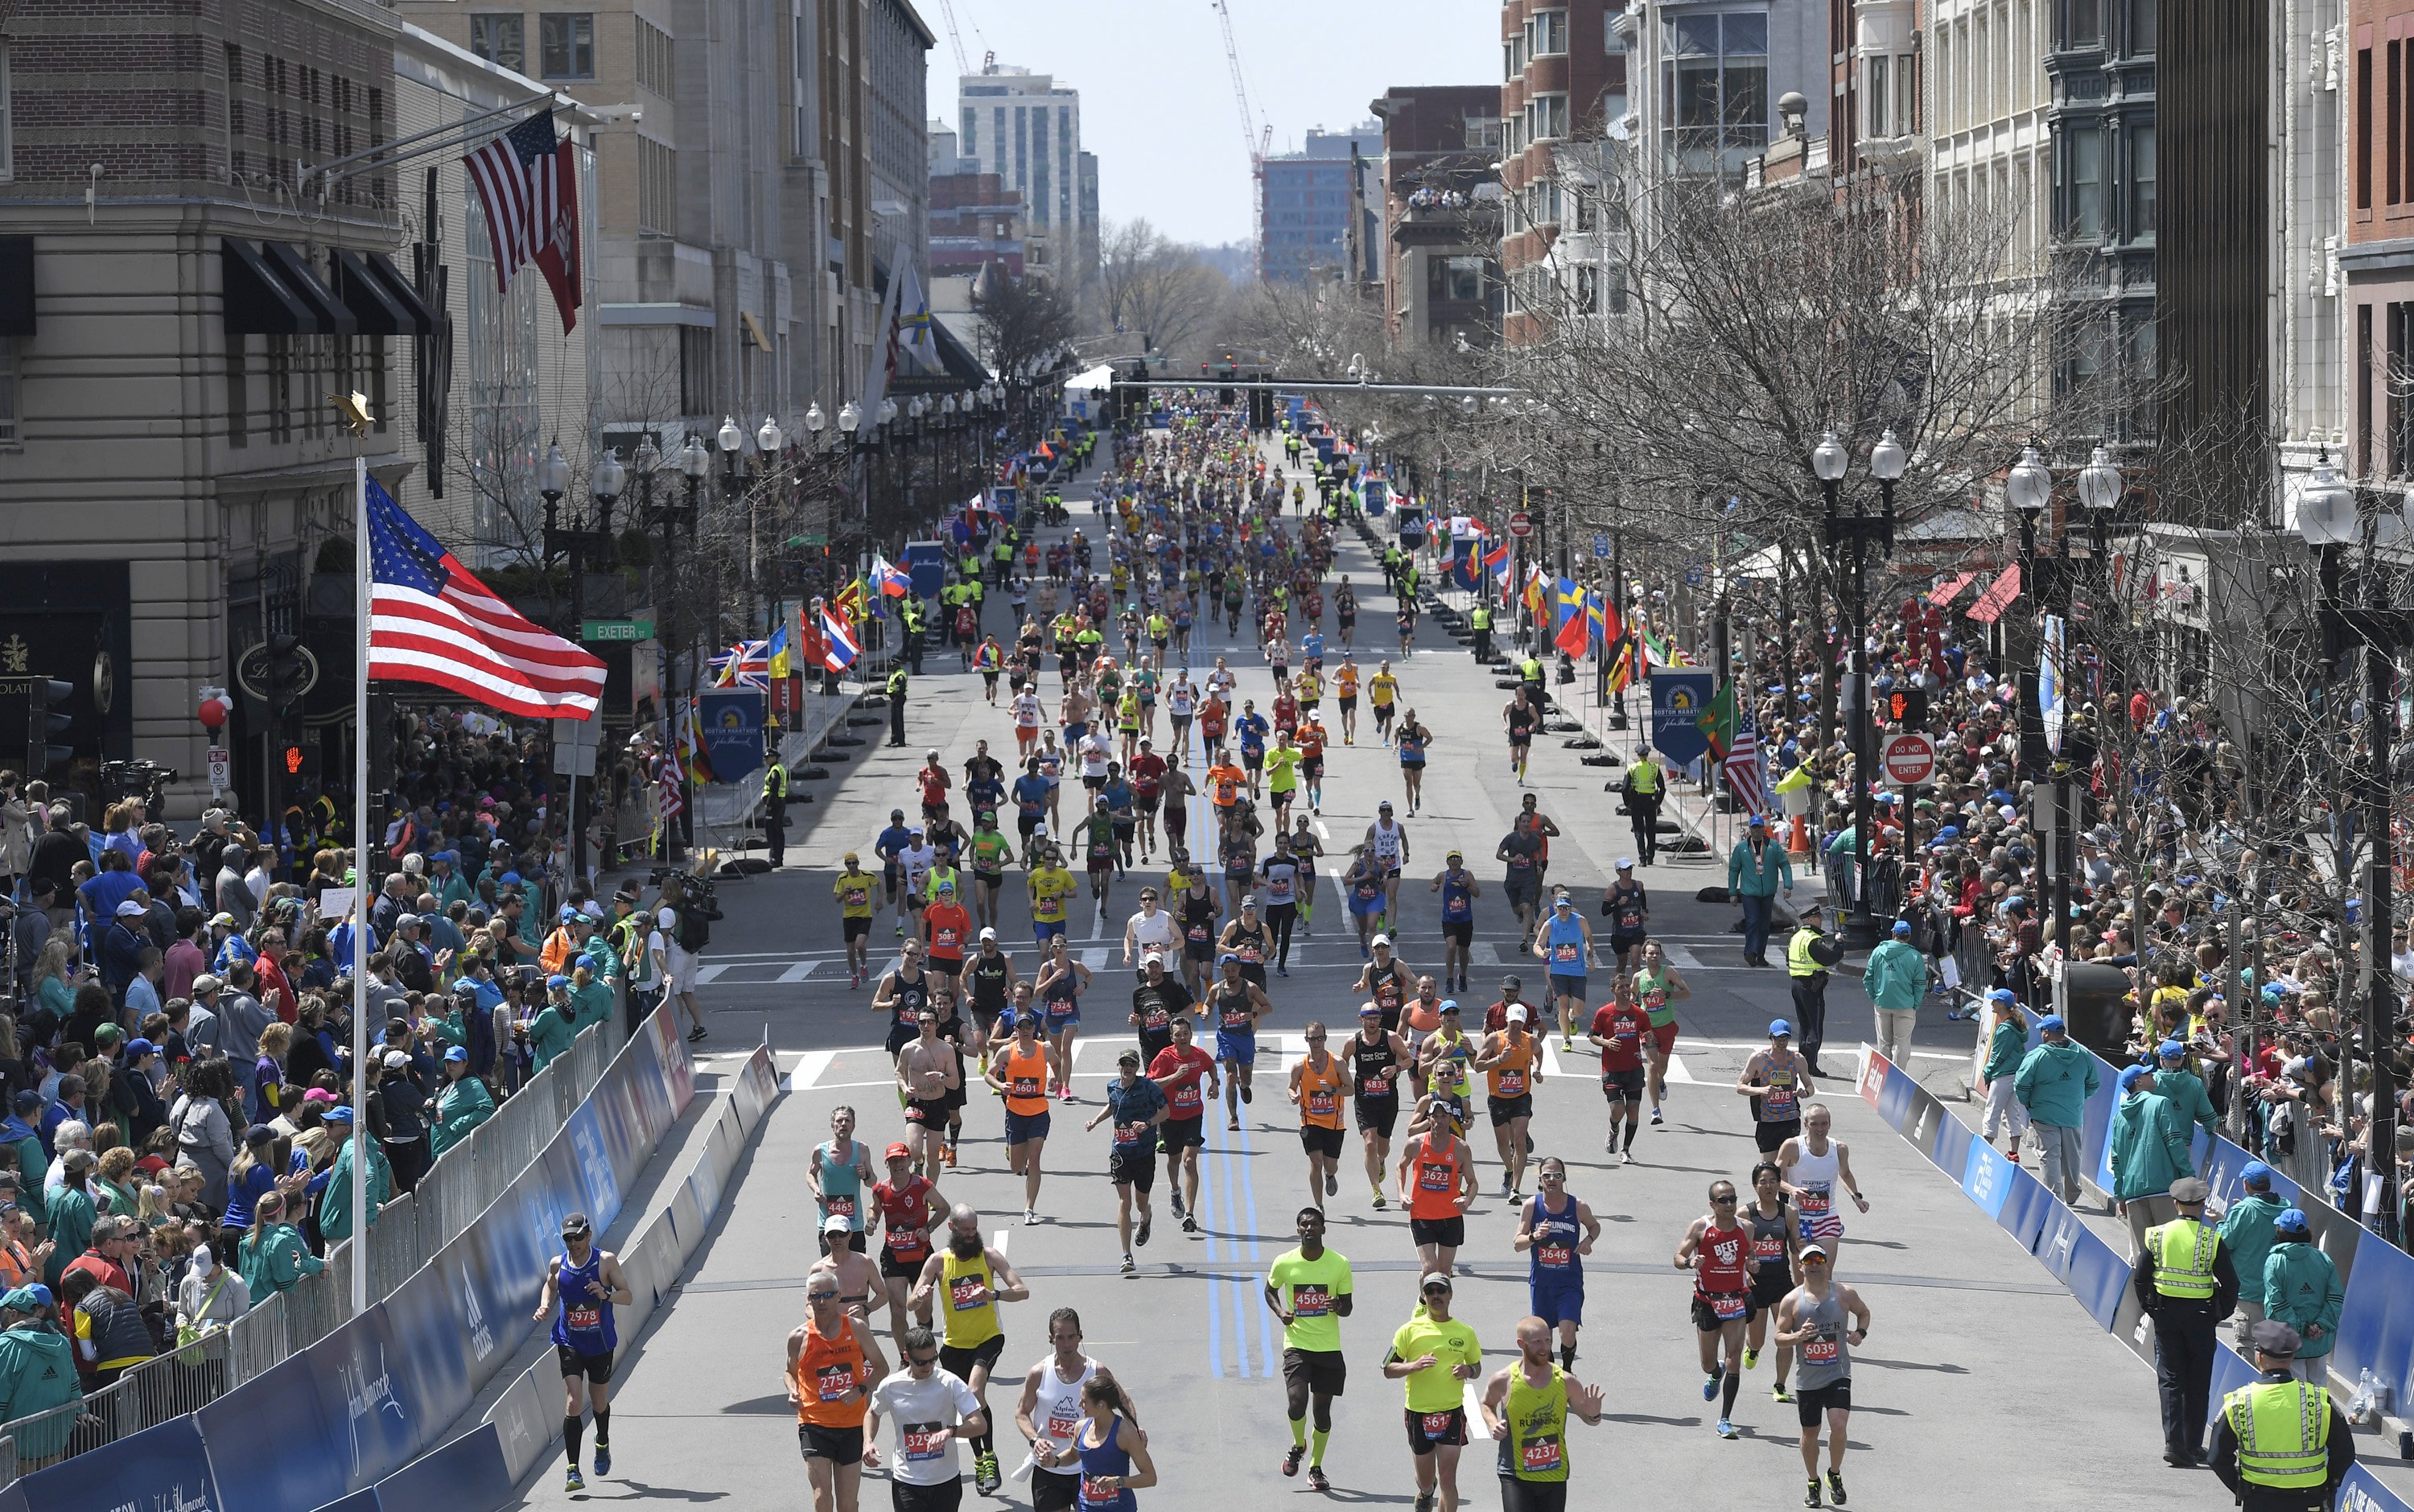 Runners approach the finish line during the 120th running of the Boston